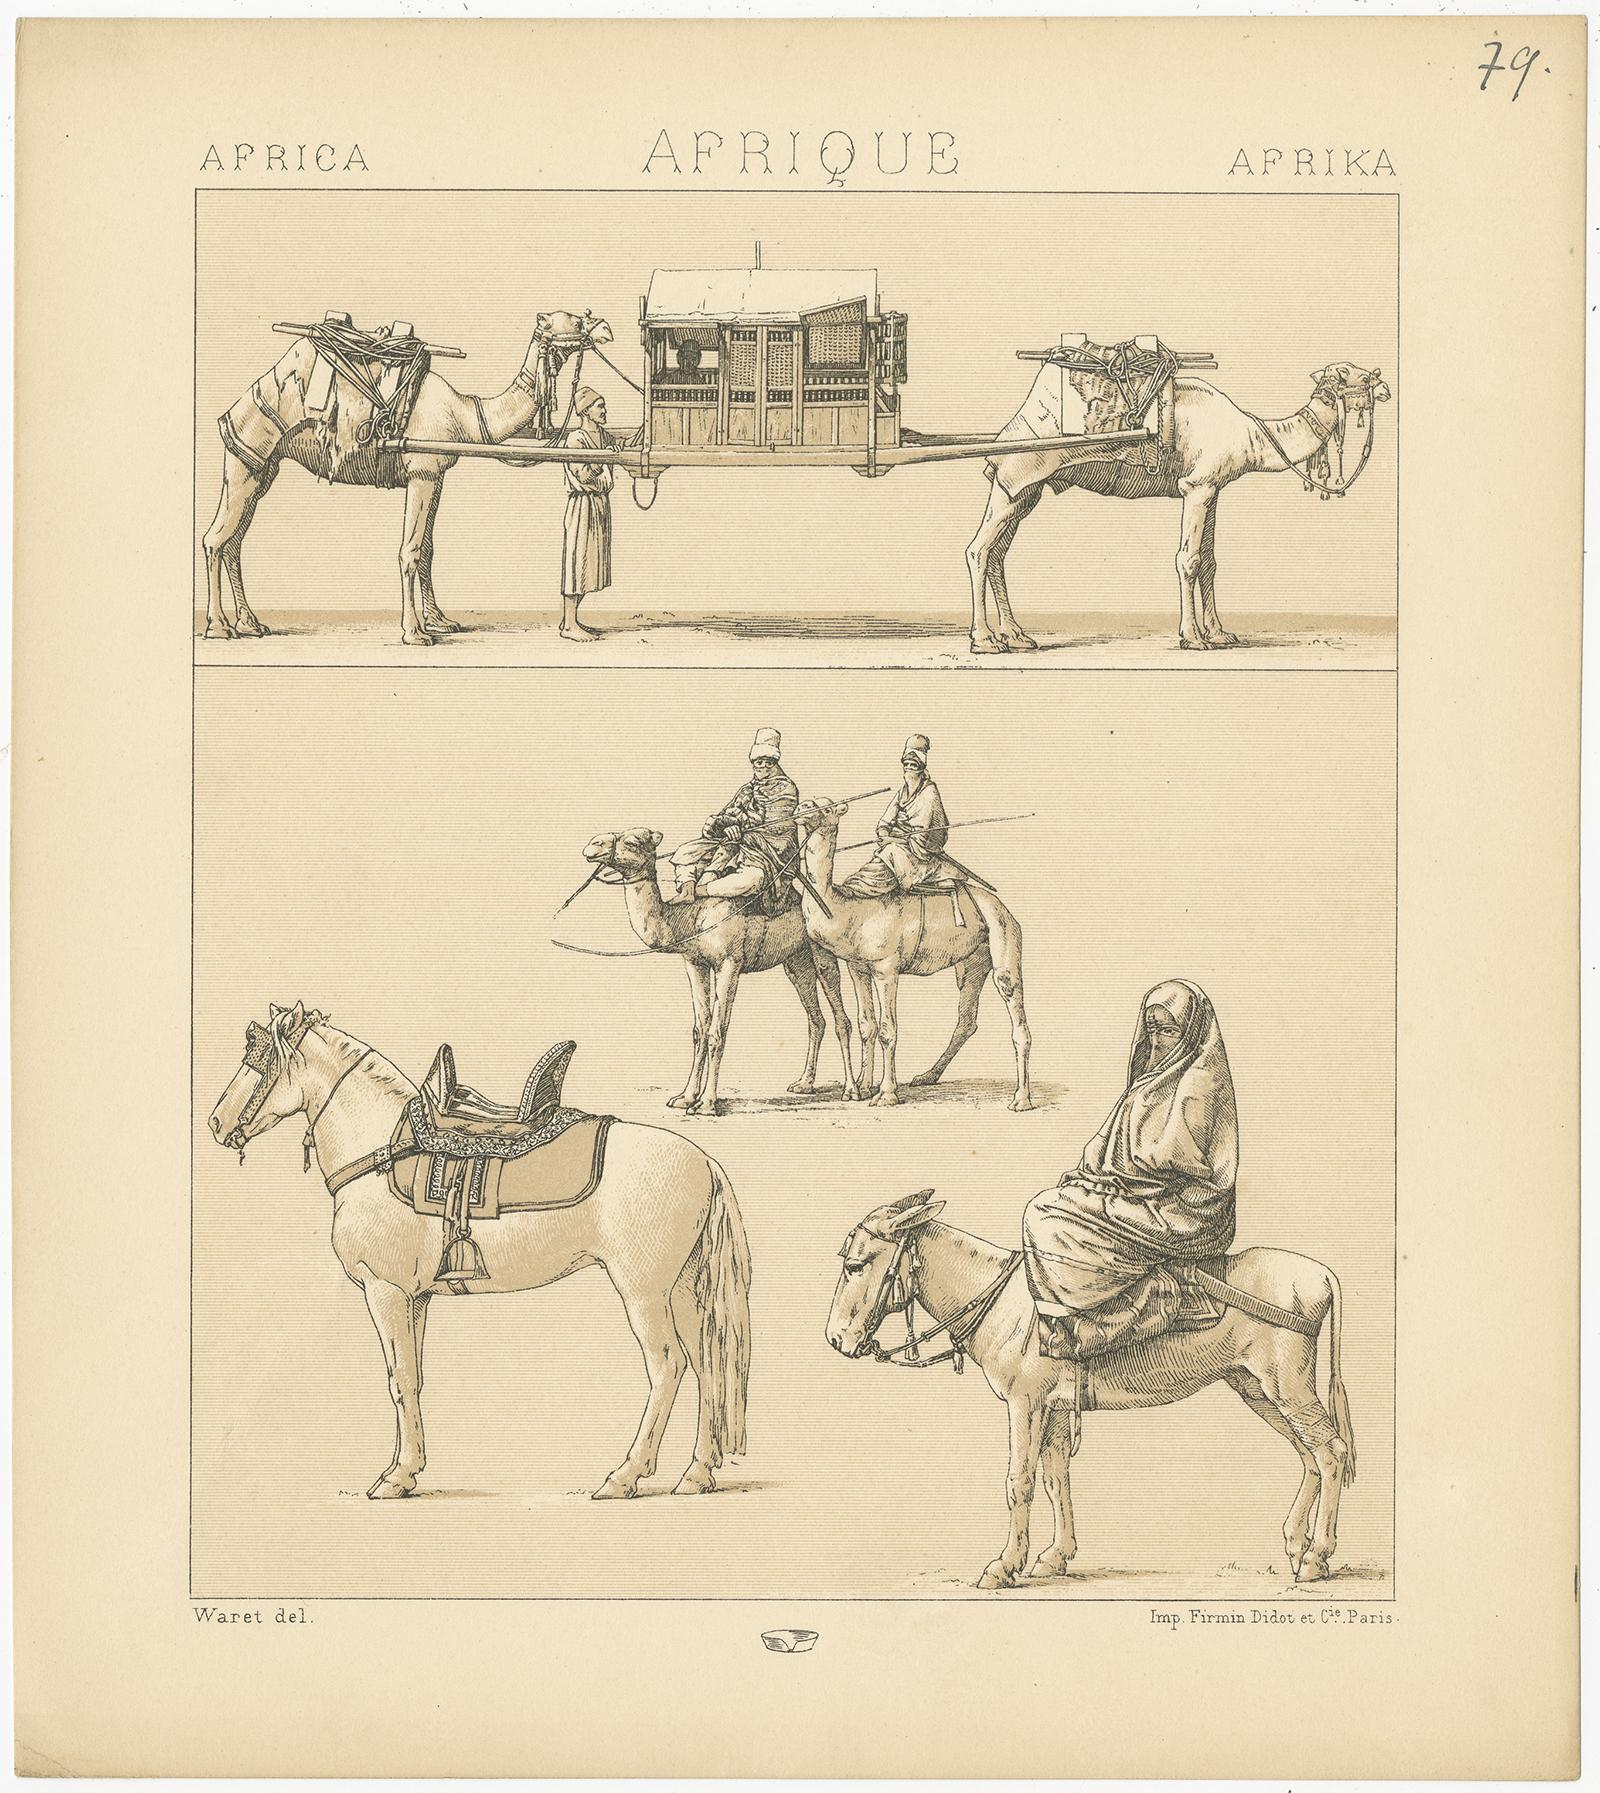 Antique print titled 'Africa - Afrique - Afrika'. Chromolithograph of African Working Animals. This print originates from 'Le Costume Historique' by M.A. Racinet. Published, circa 1880.